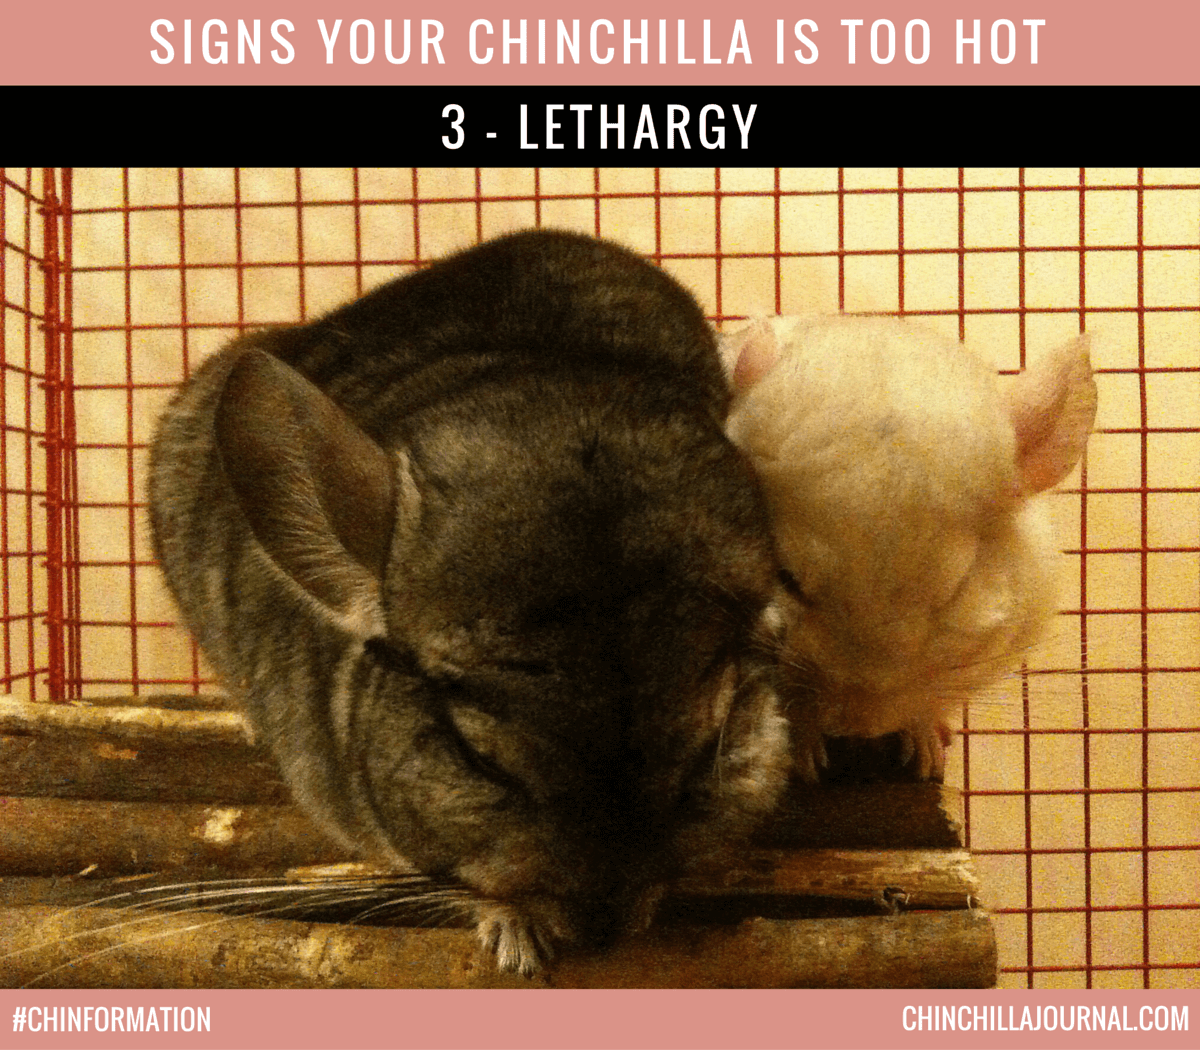 Signs Your Chinchilla Is Too Hot 3 - Lethargy